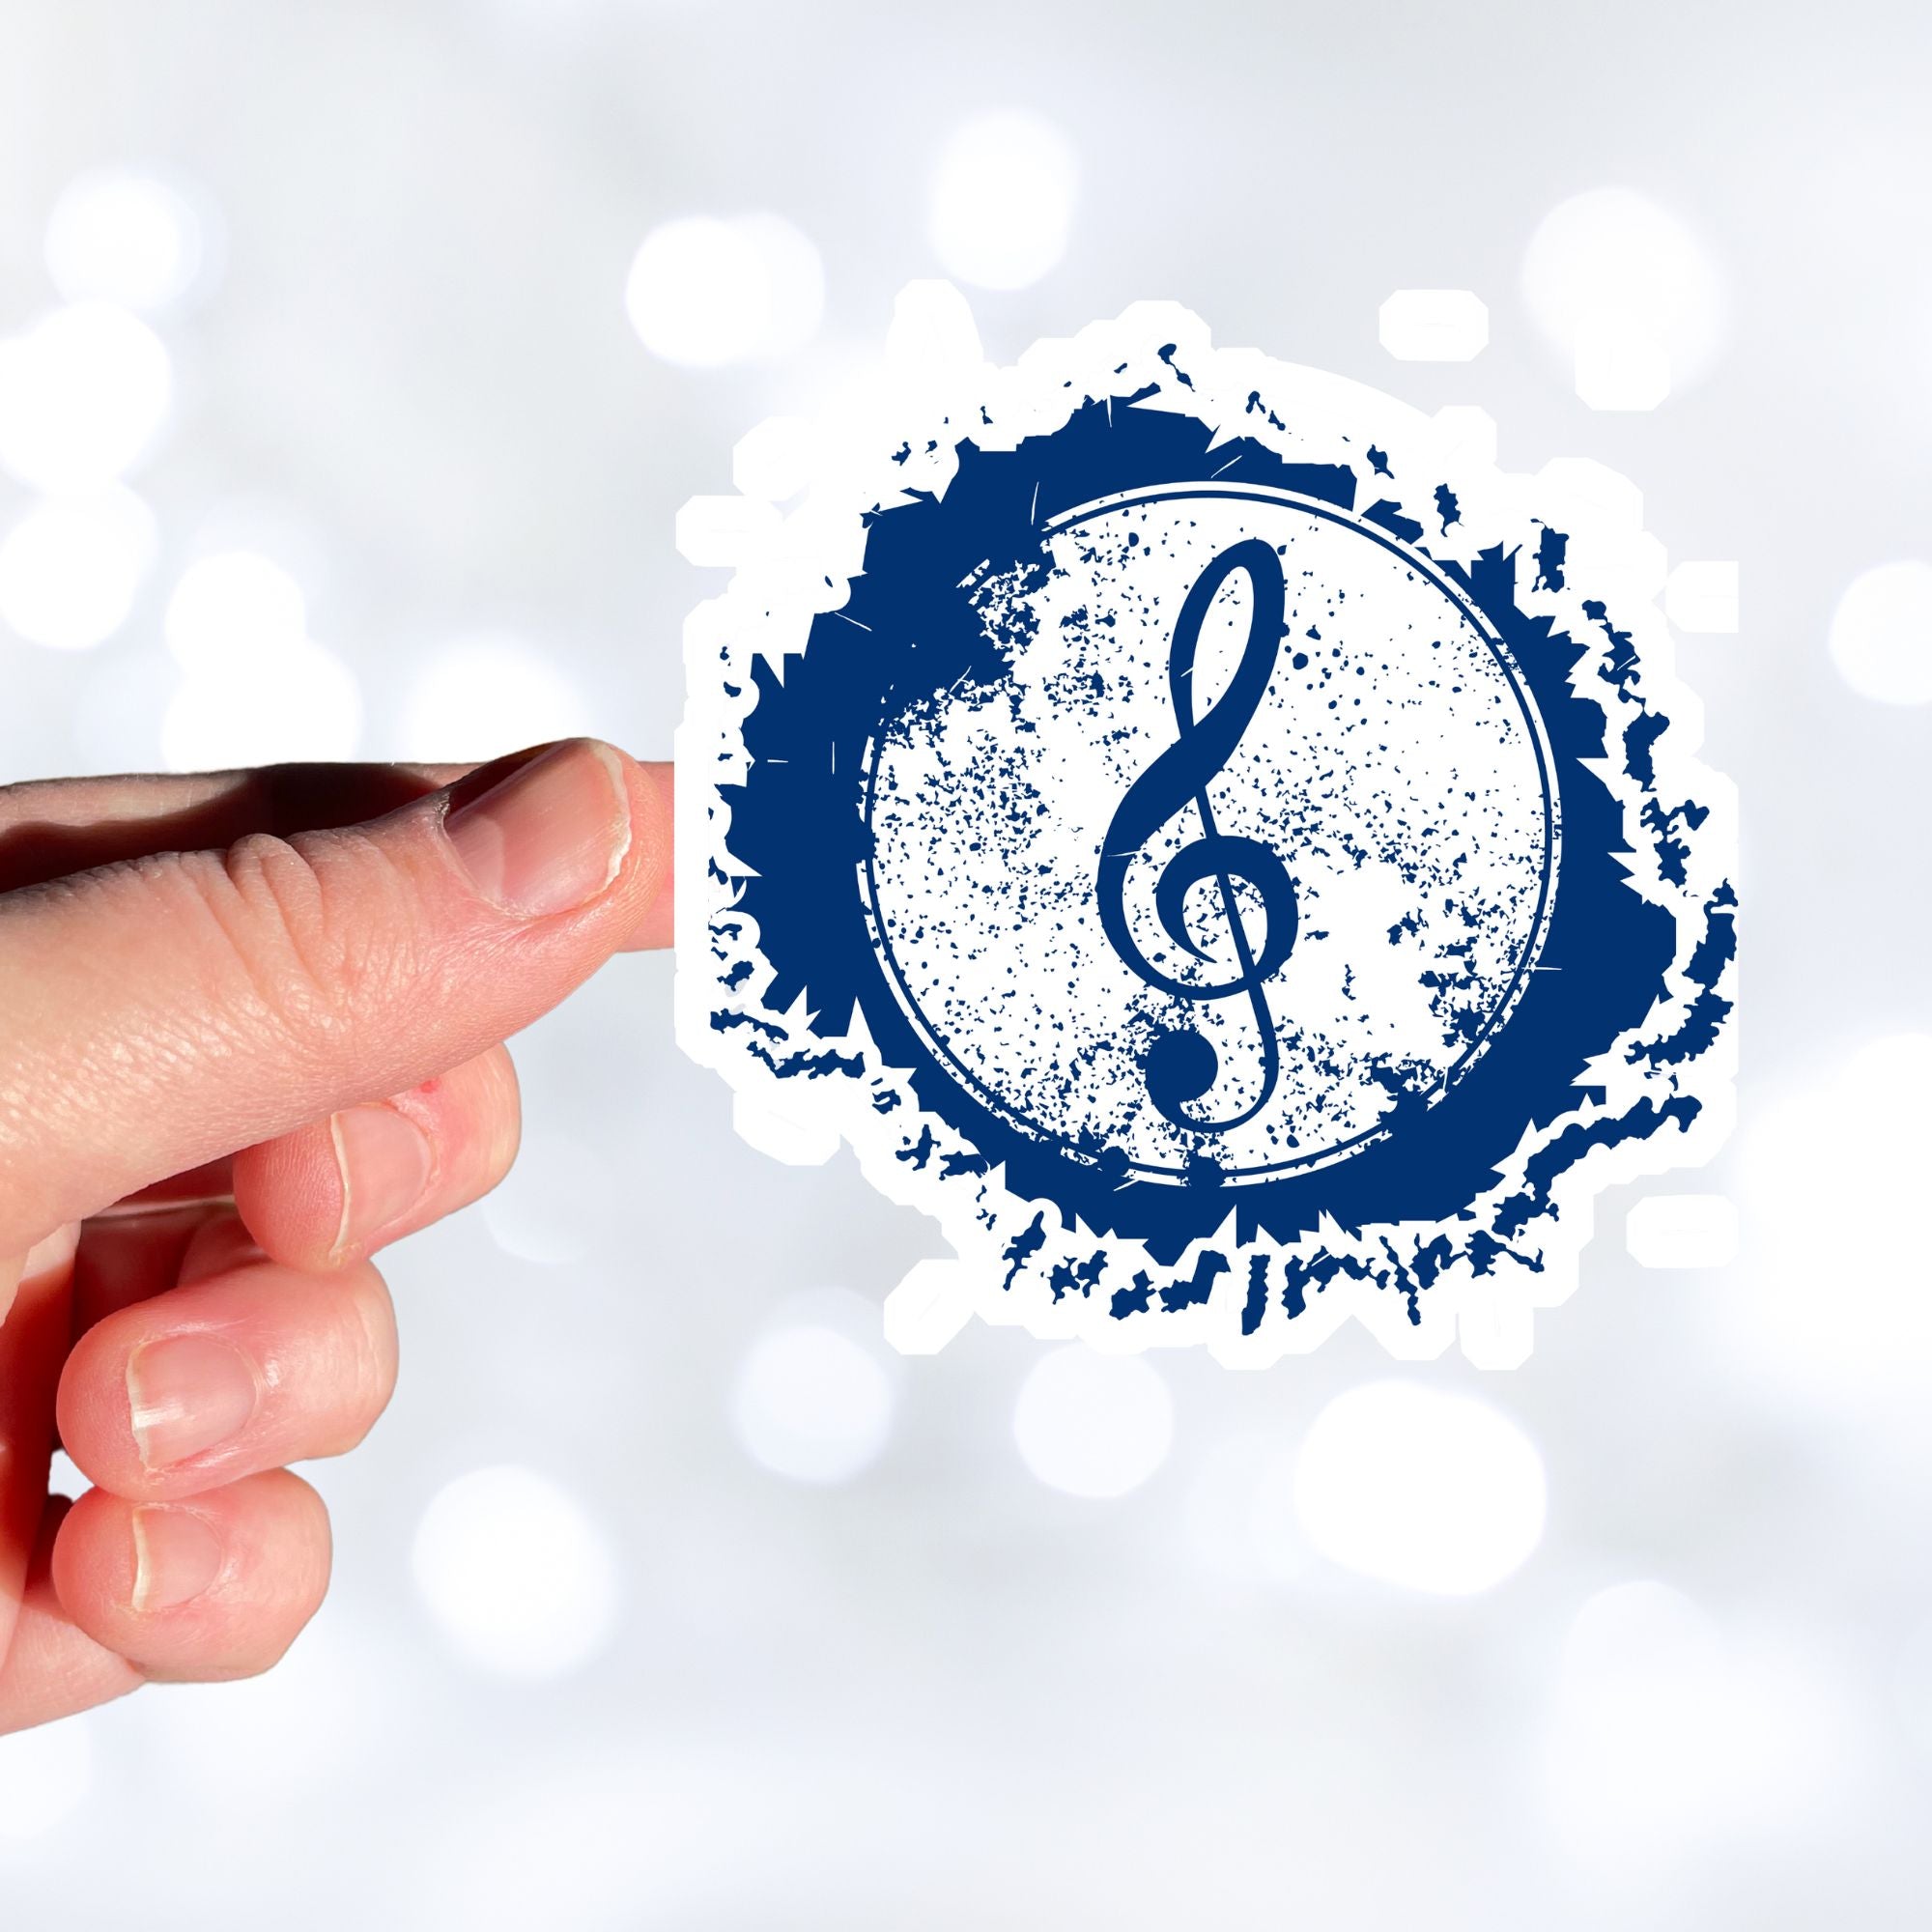 This individual die-cut sticker features a blue treble clef with a paint splattered background. Perfect for performers and music lovers alike!  This image shows a hand holding the treble clef sticker.